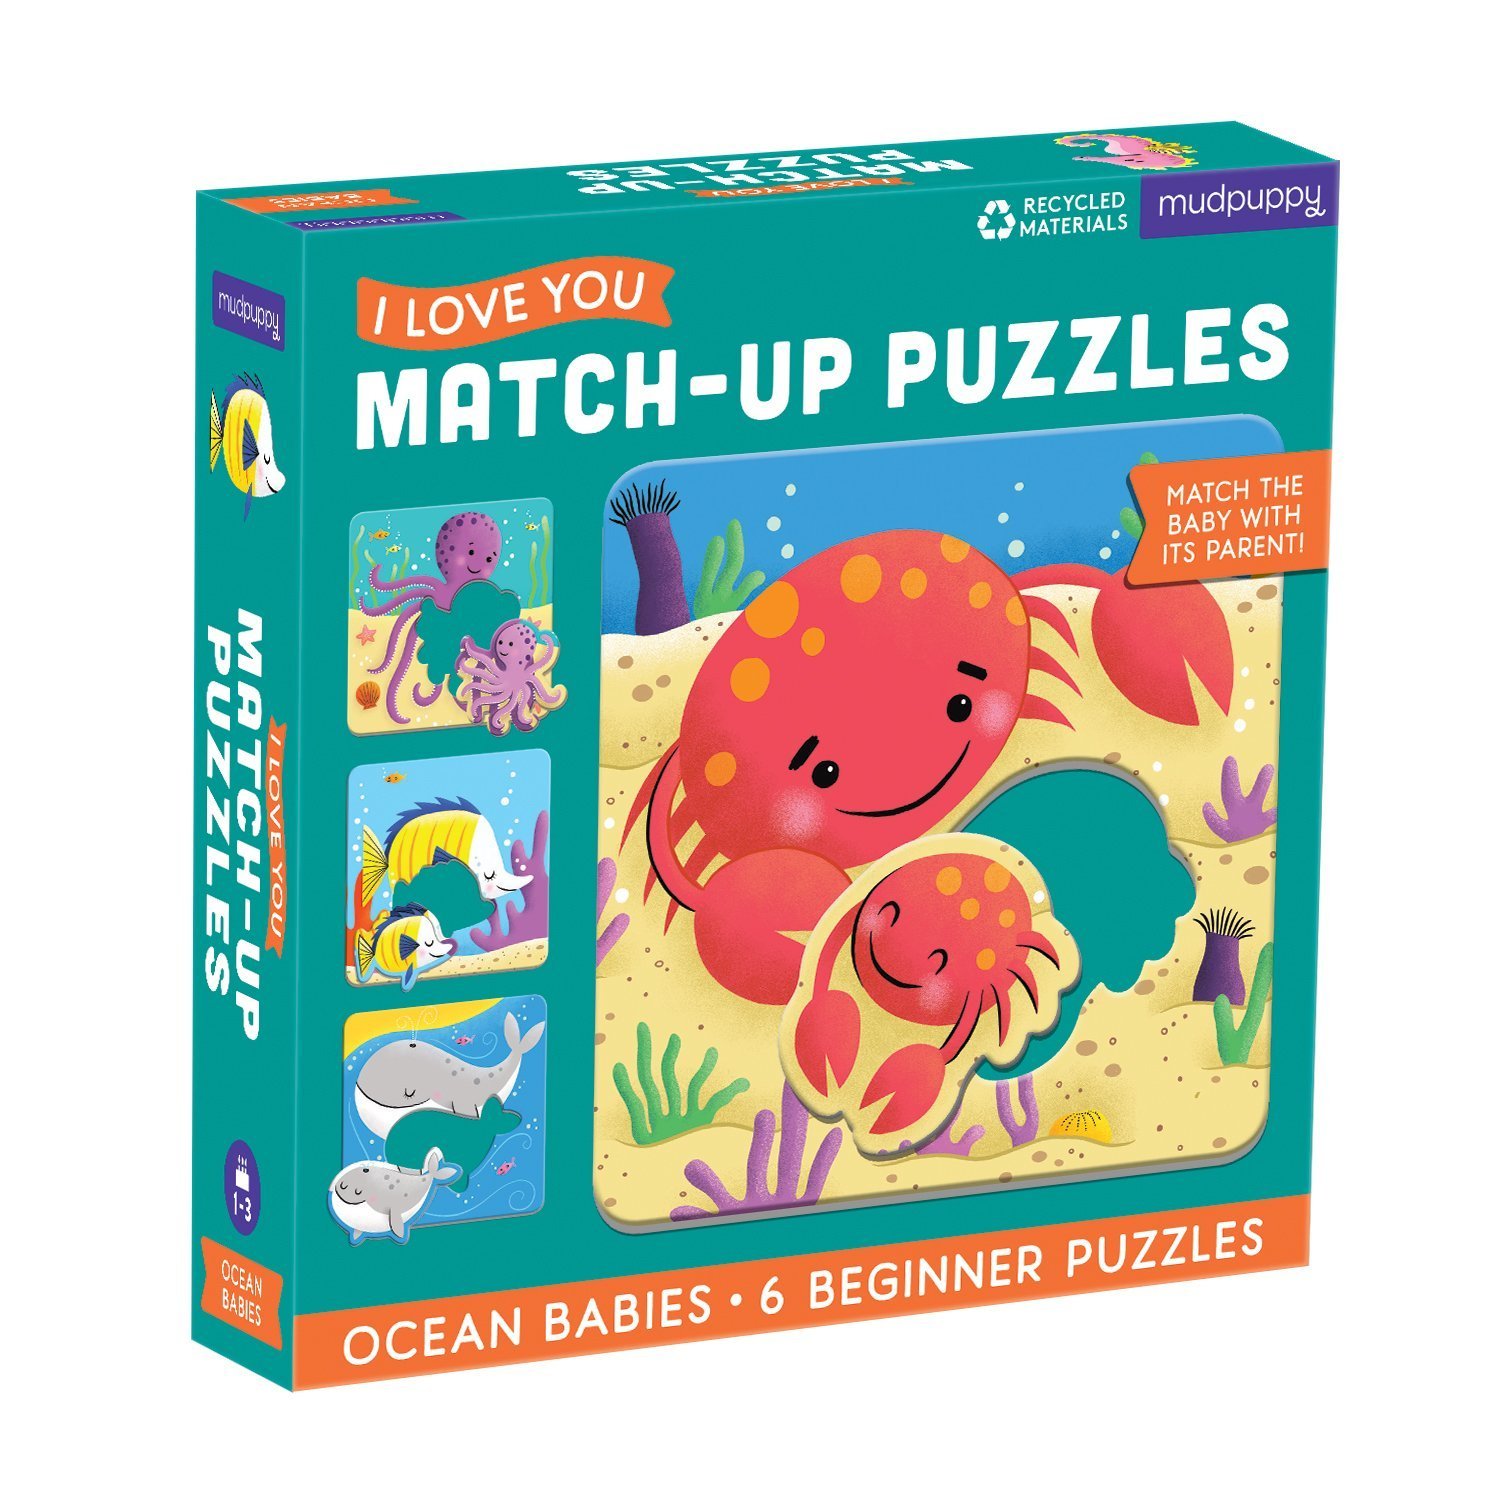 Mudpuppy Ocean Babies I Love You Match-Up Puzzles